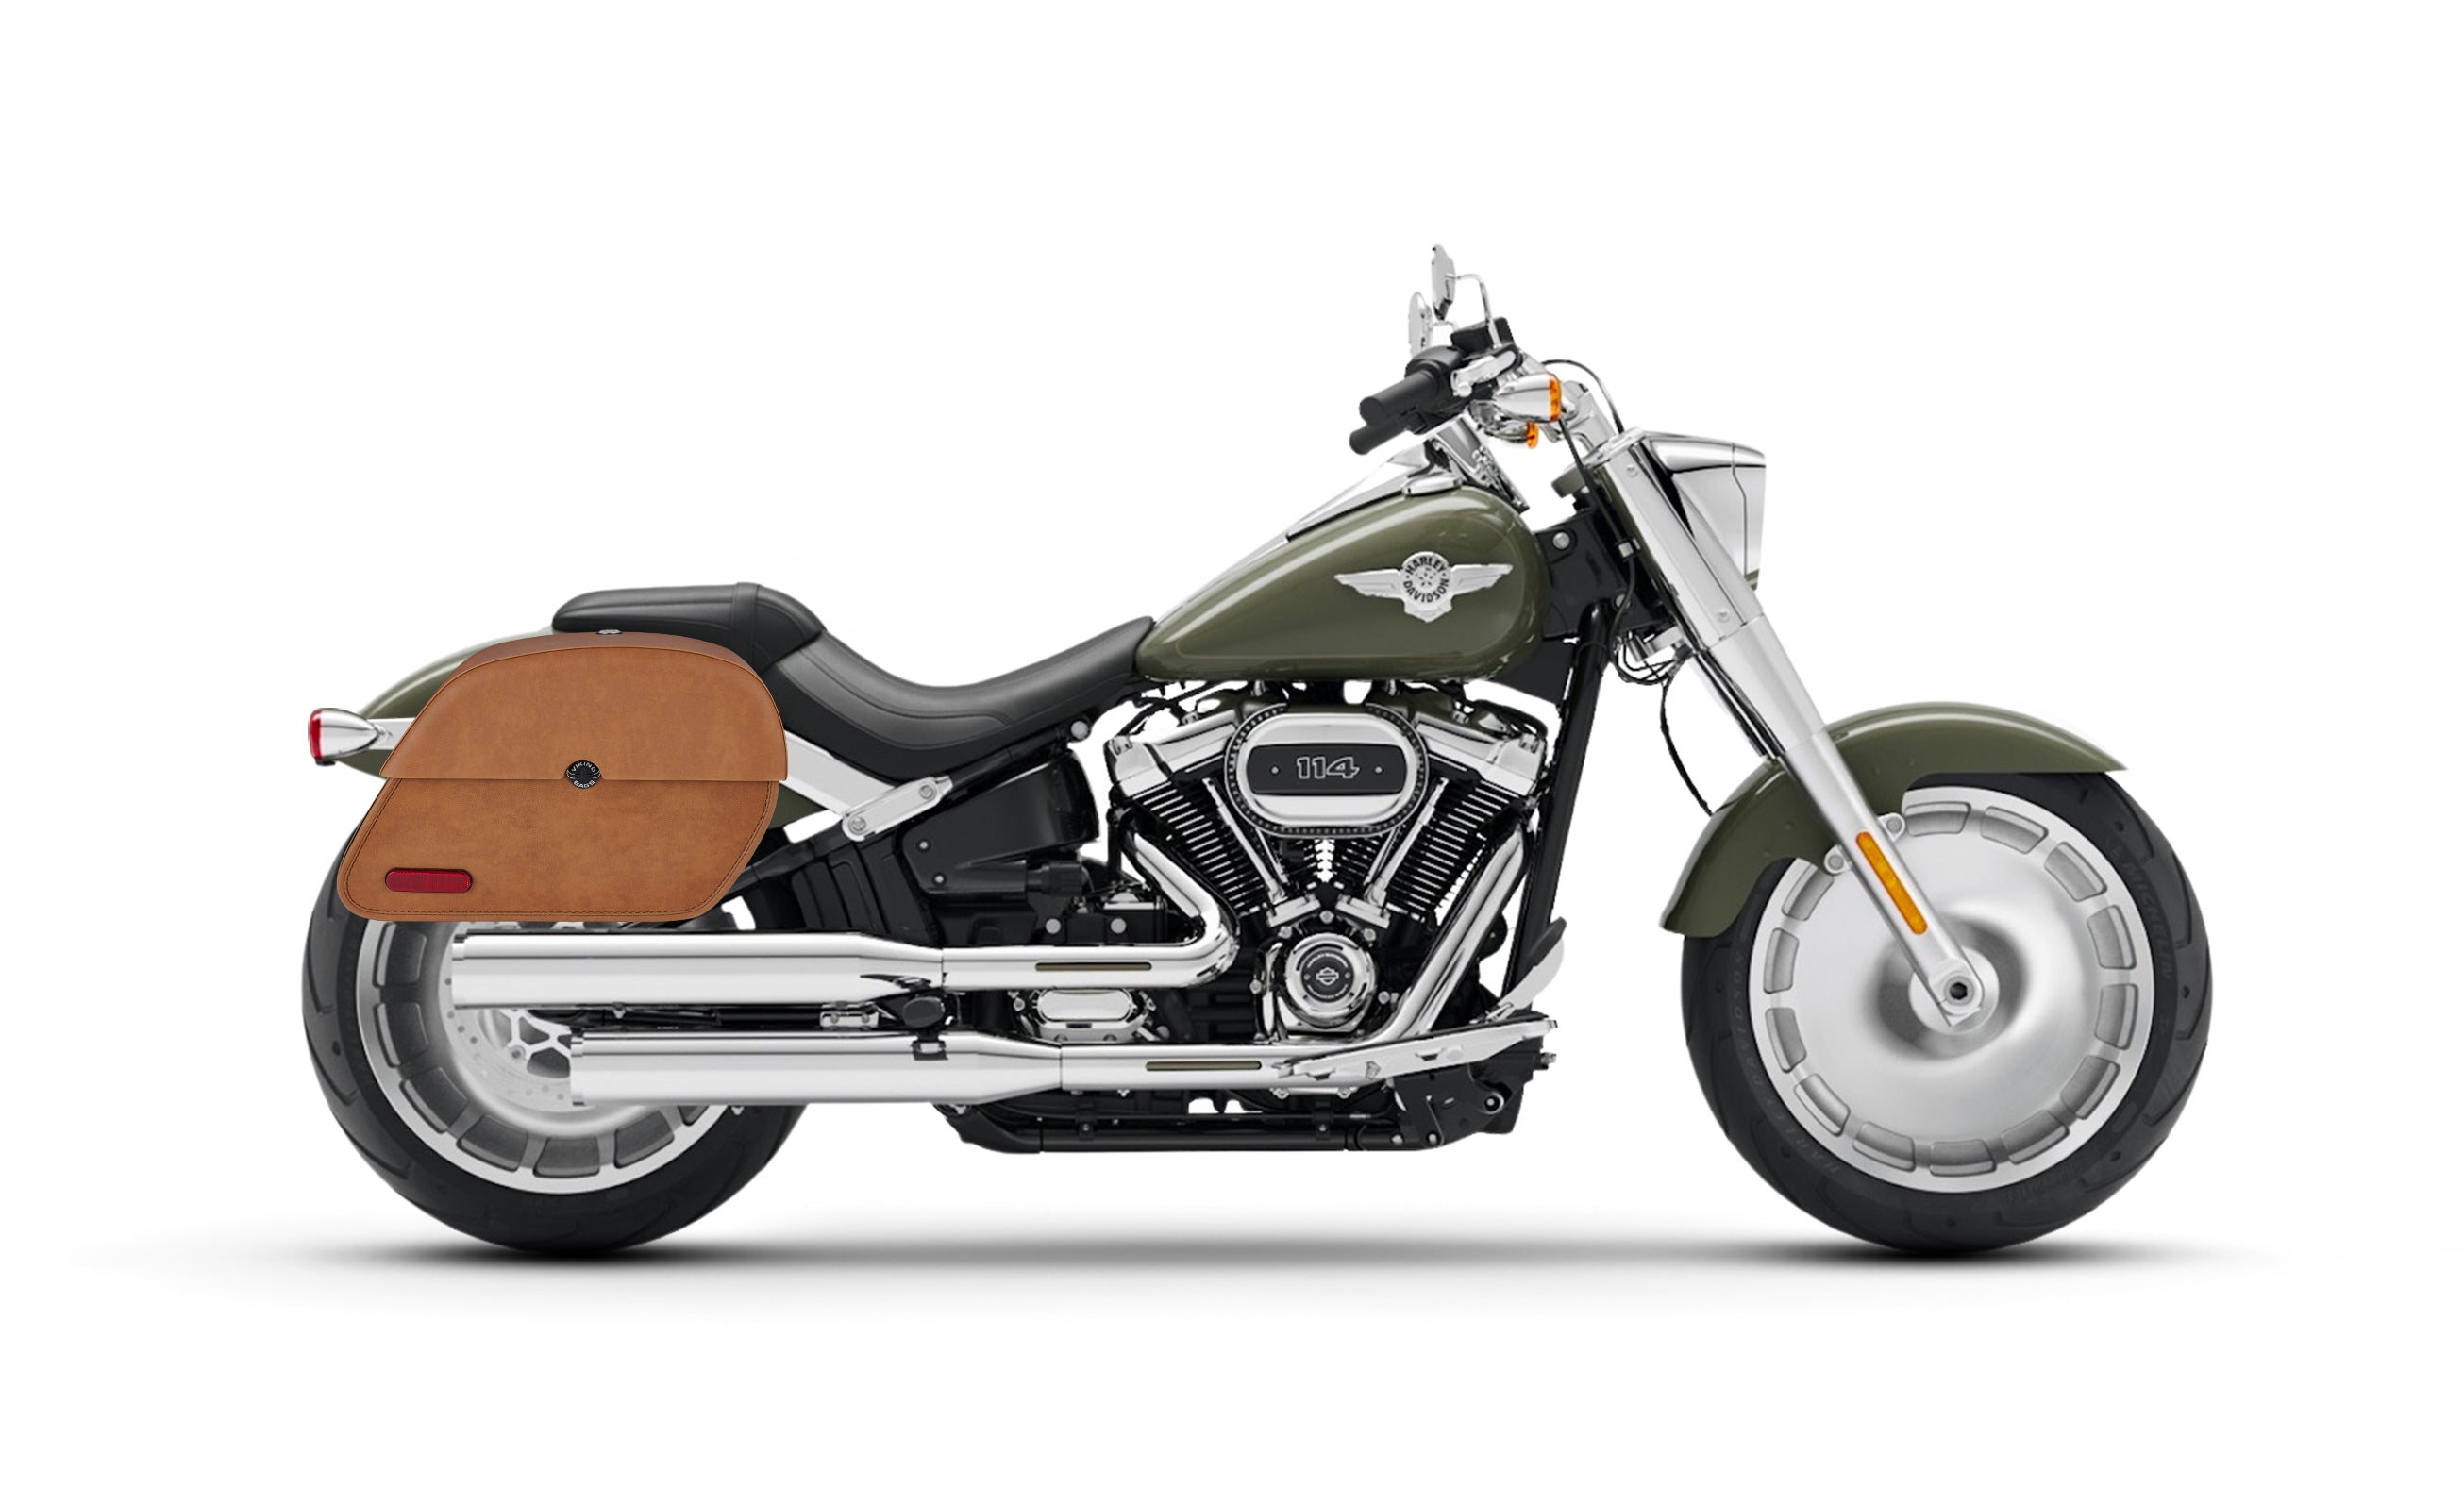 33L - Panzer Brown Large Leather Motorcycle Saddlebags for Harley Softail Fat Boy FLFB/S @expand